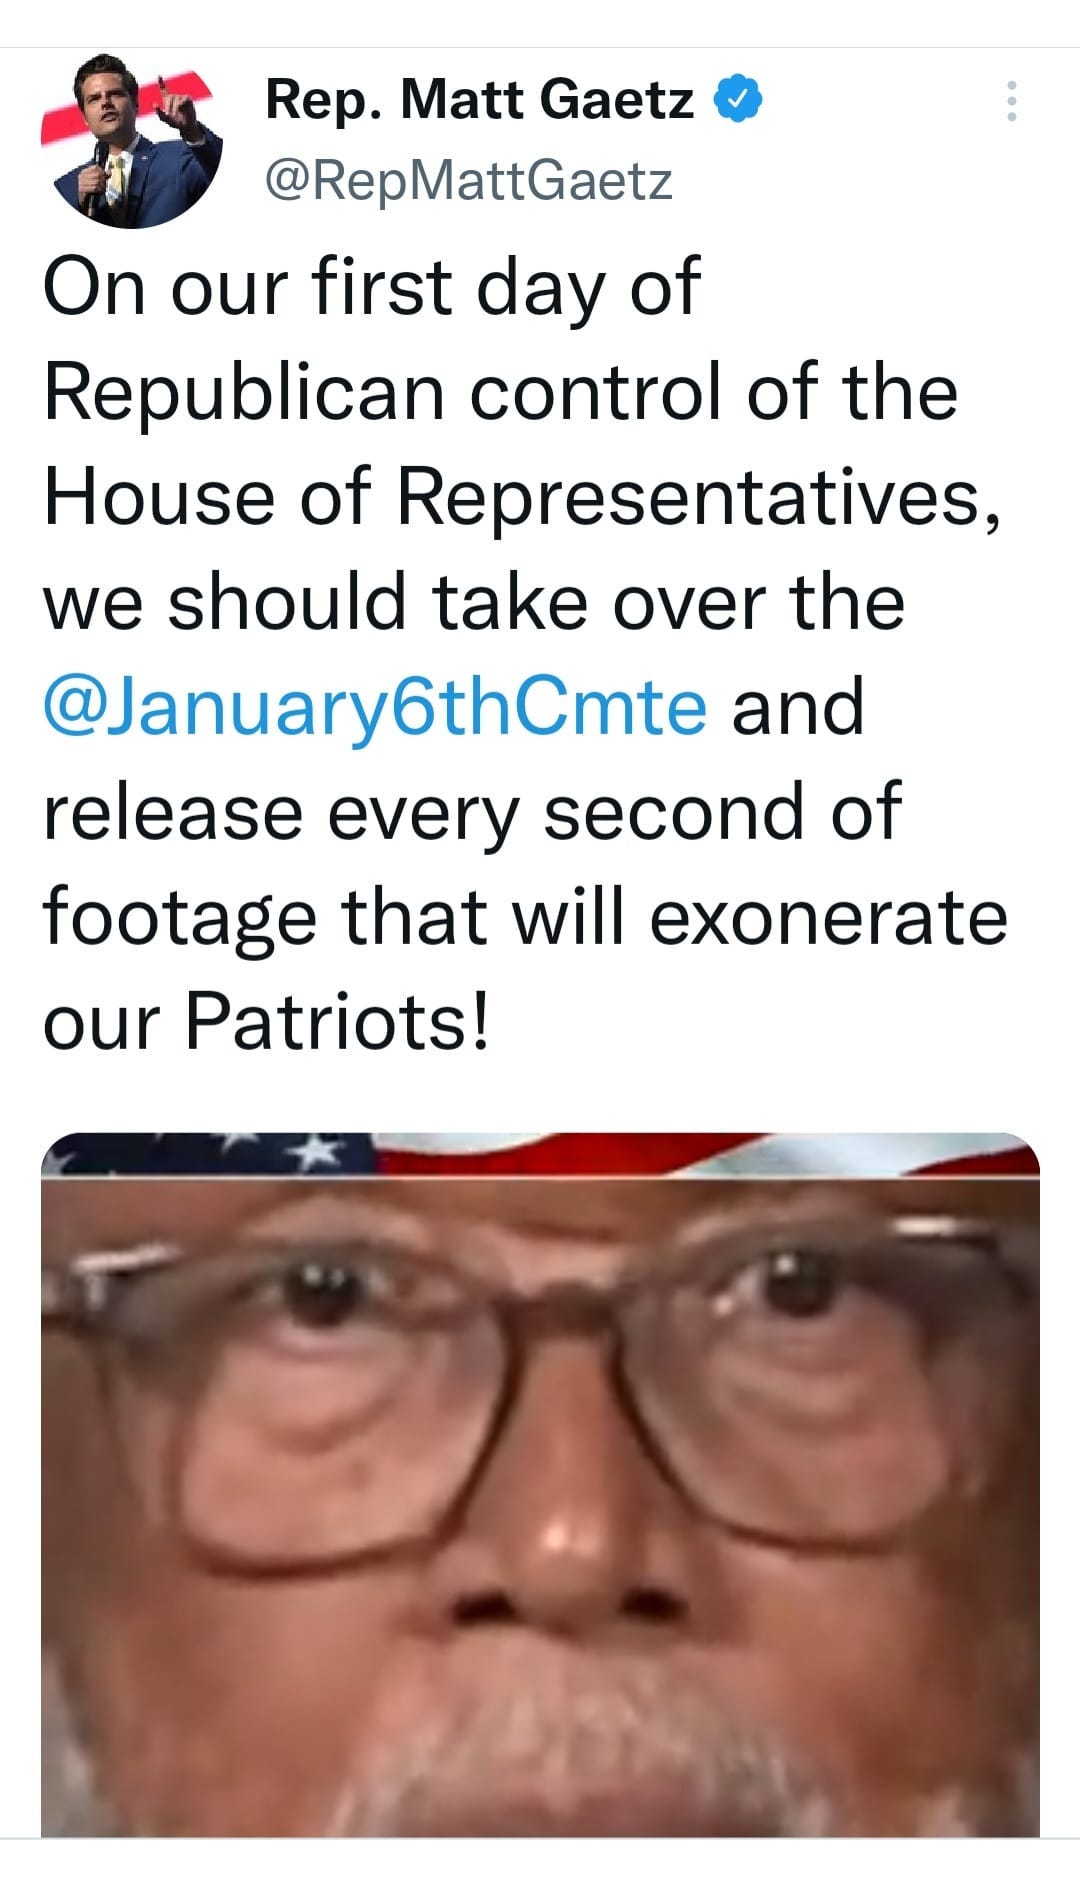 May be an image of 2 people and text that says 'Rep. Matt Gaetz @RepMattGaetz On our first day of Republican control of the House of Representatives, we should take over the @January6thCmte and release every second of footage that will exonerate our Patriots!'